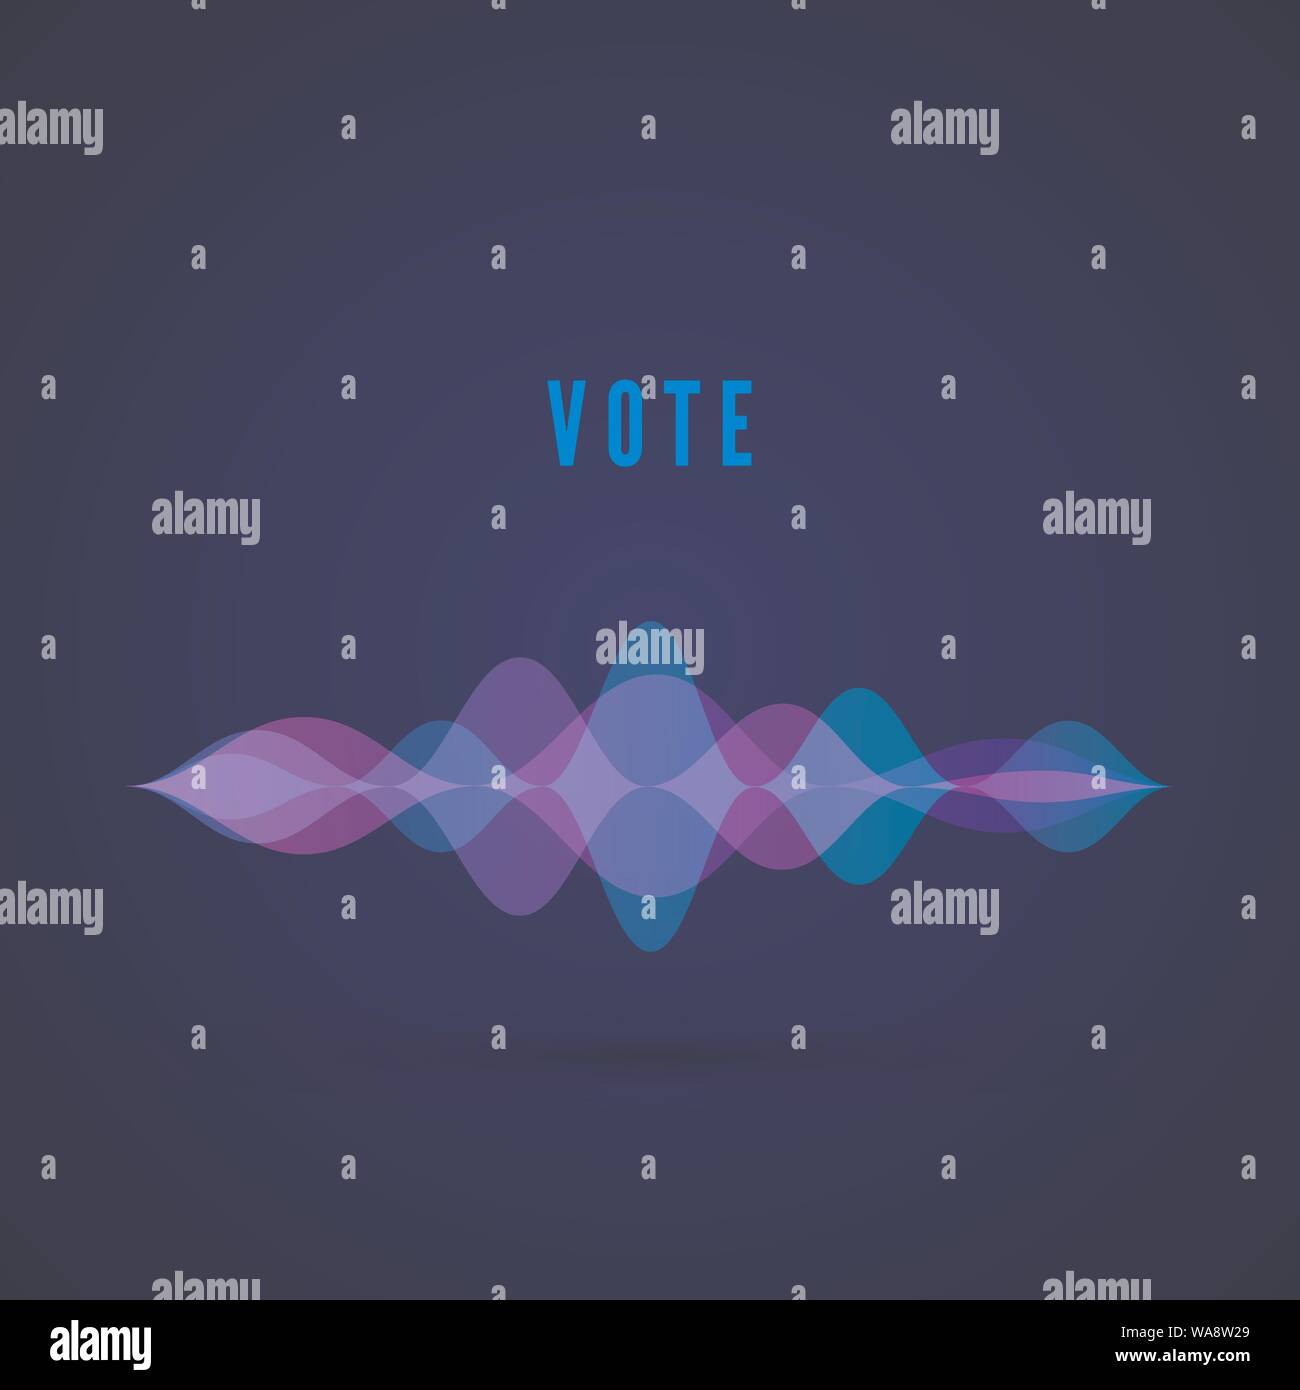 Display of sound frequency. Digital vote interface for app. Design of music pulse. Vector illustration Stock Vector